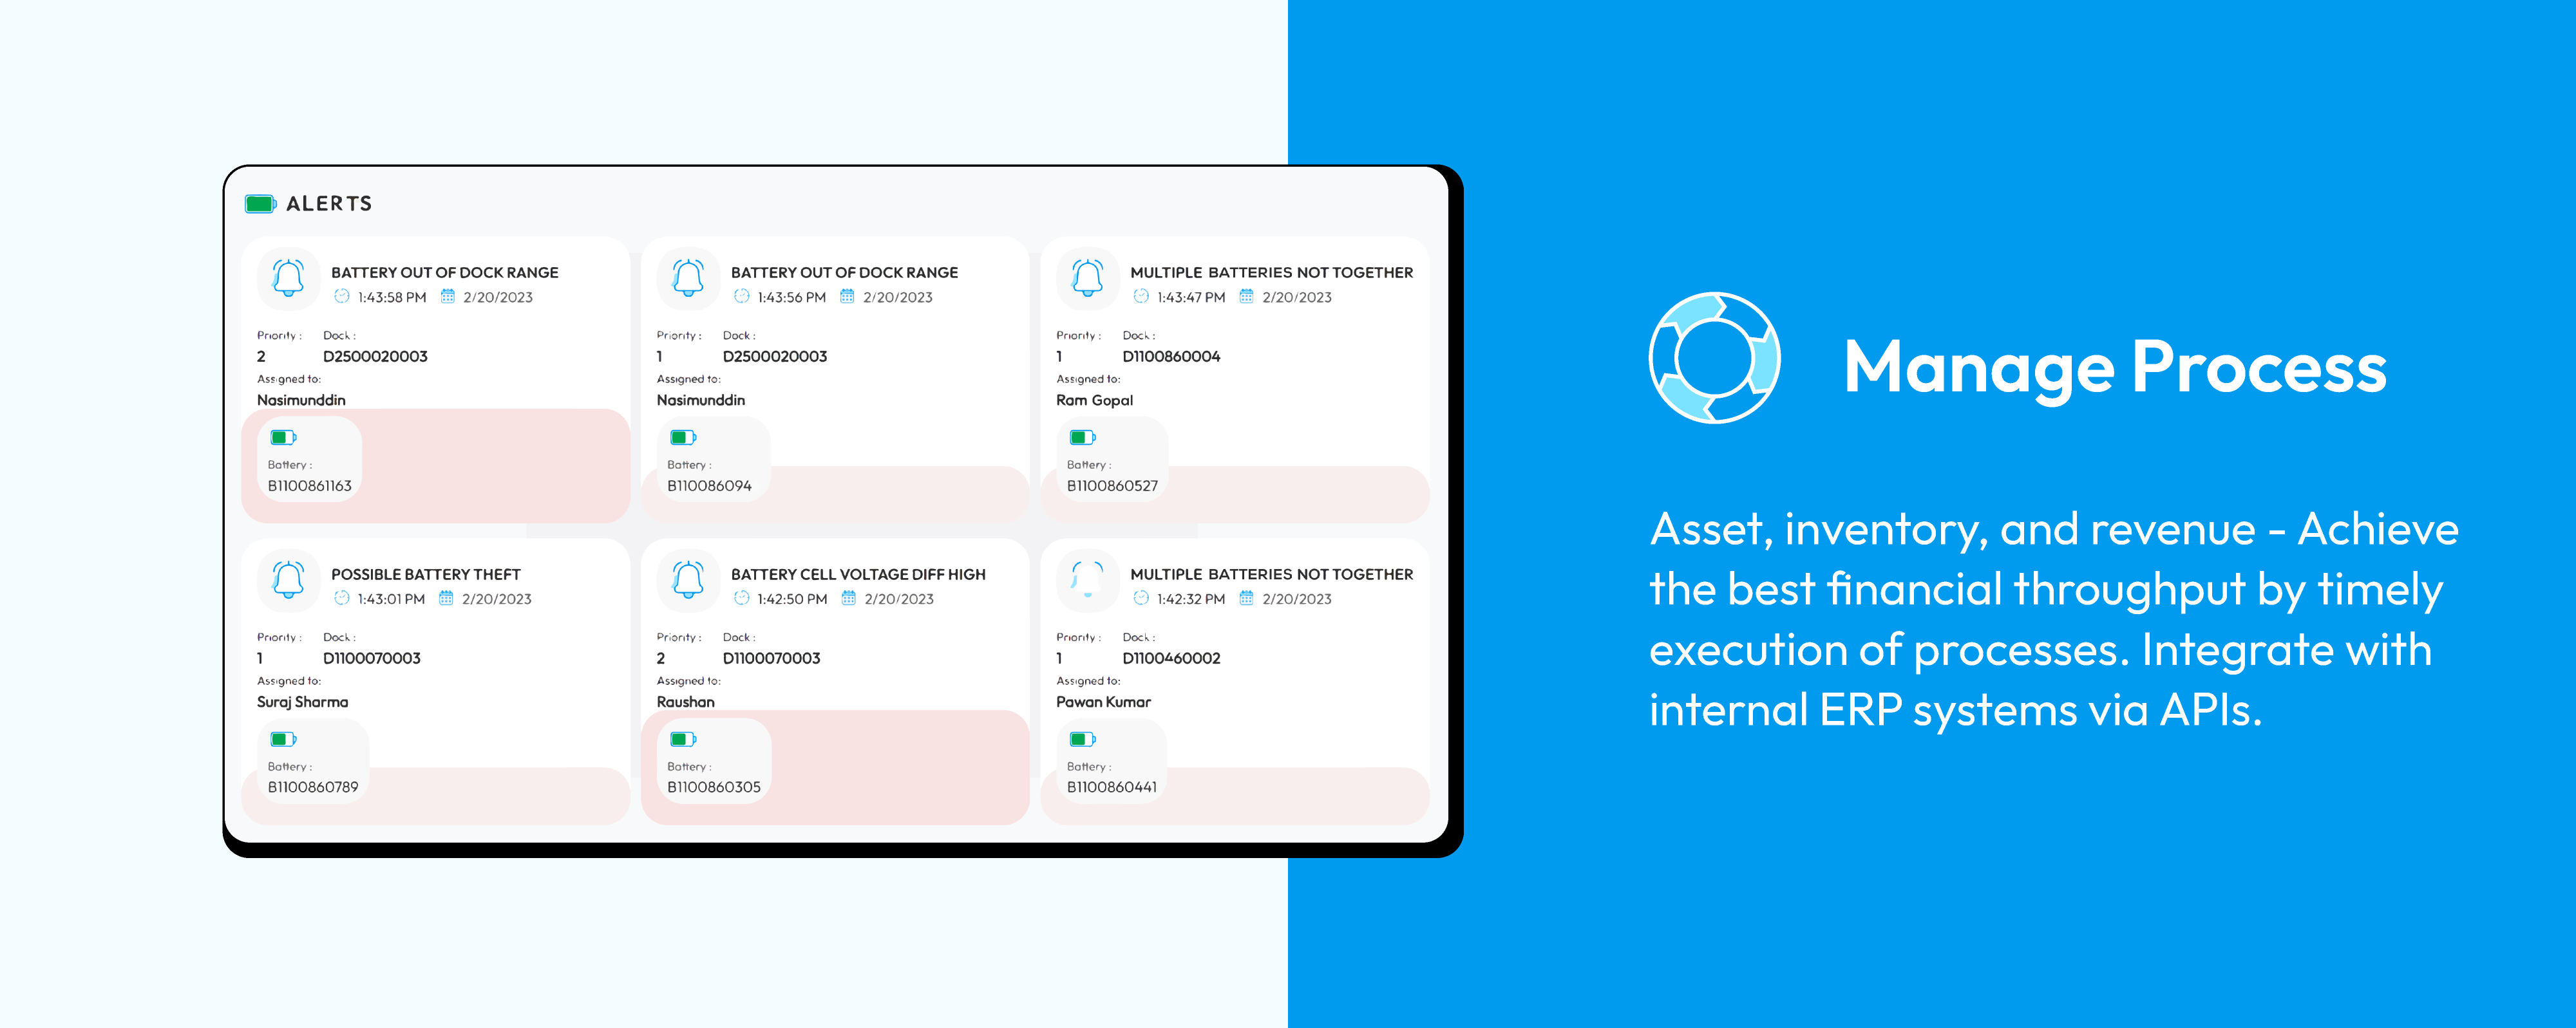 Manage process : Asset, inventory, and revenue. Achieve the best financial throughput by timely execution of processes. Integrate with internal ERP systems via APIs.